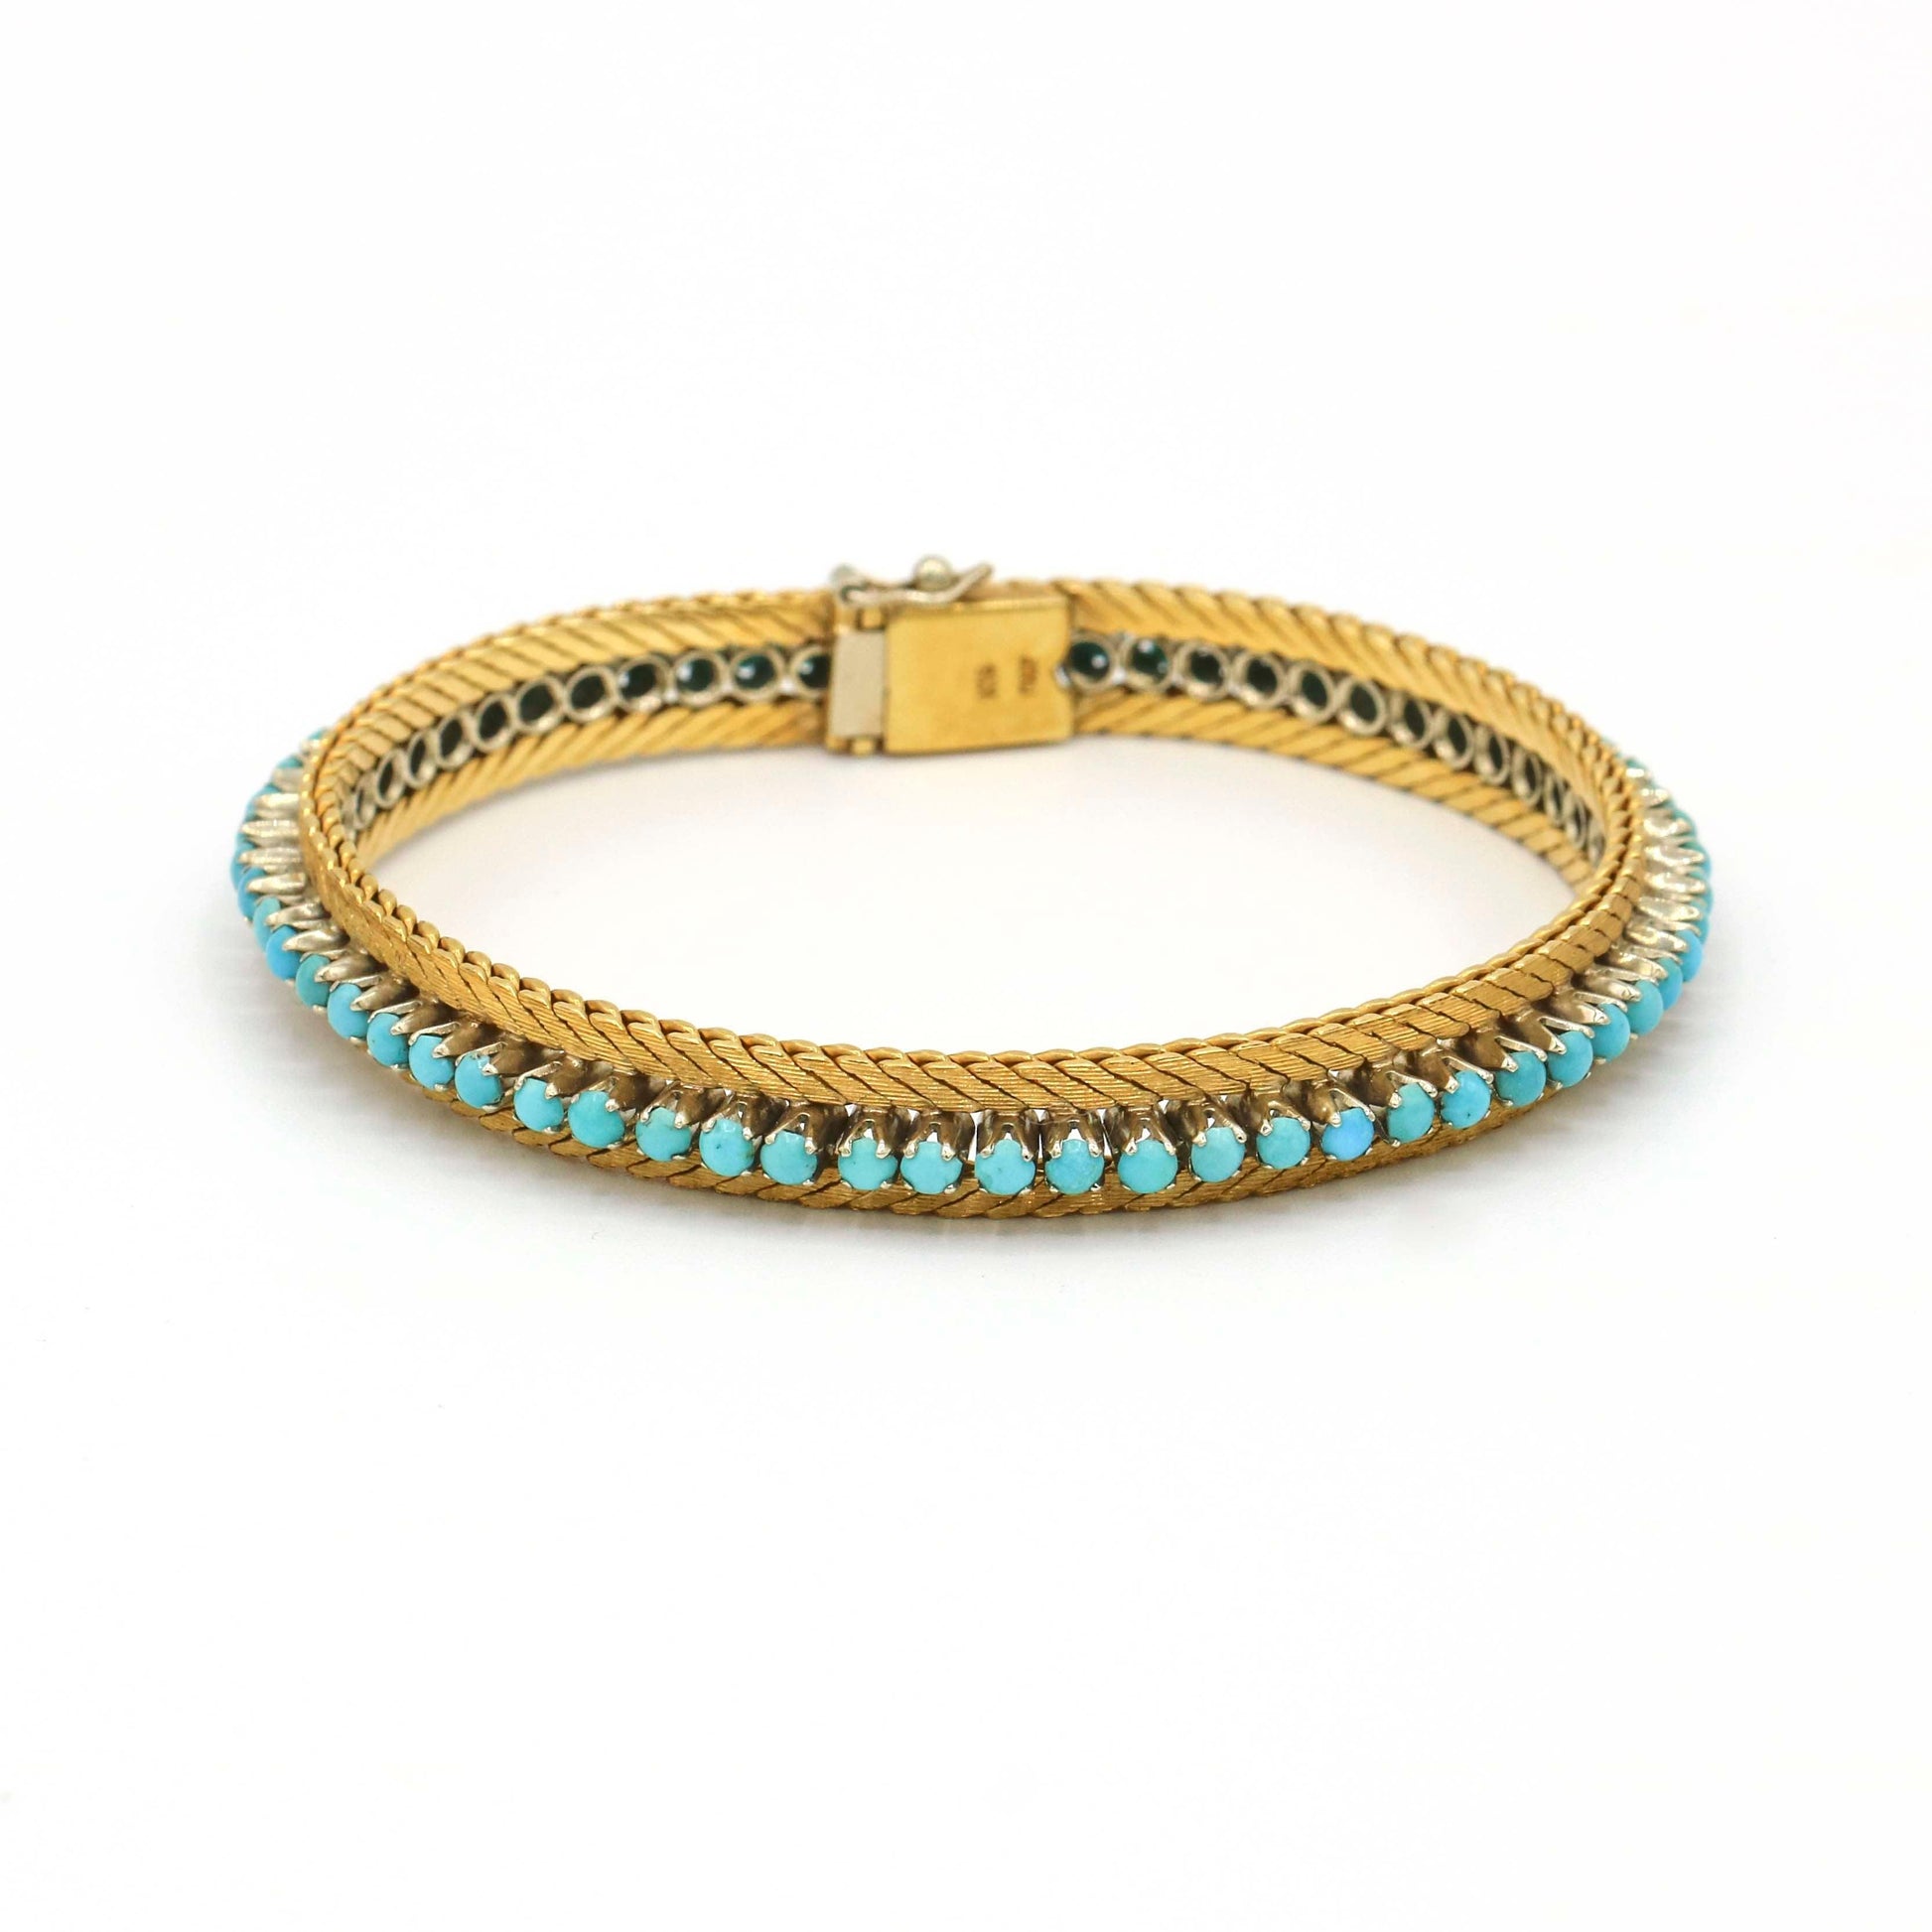 Women's Vintage Turquoise Textured Snake Chain Bracelet in 18k Yellow Gold - 31 Jewels Inc.